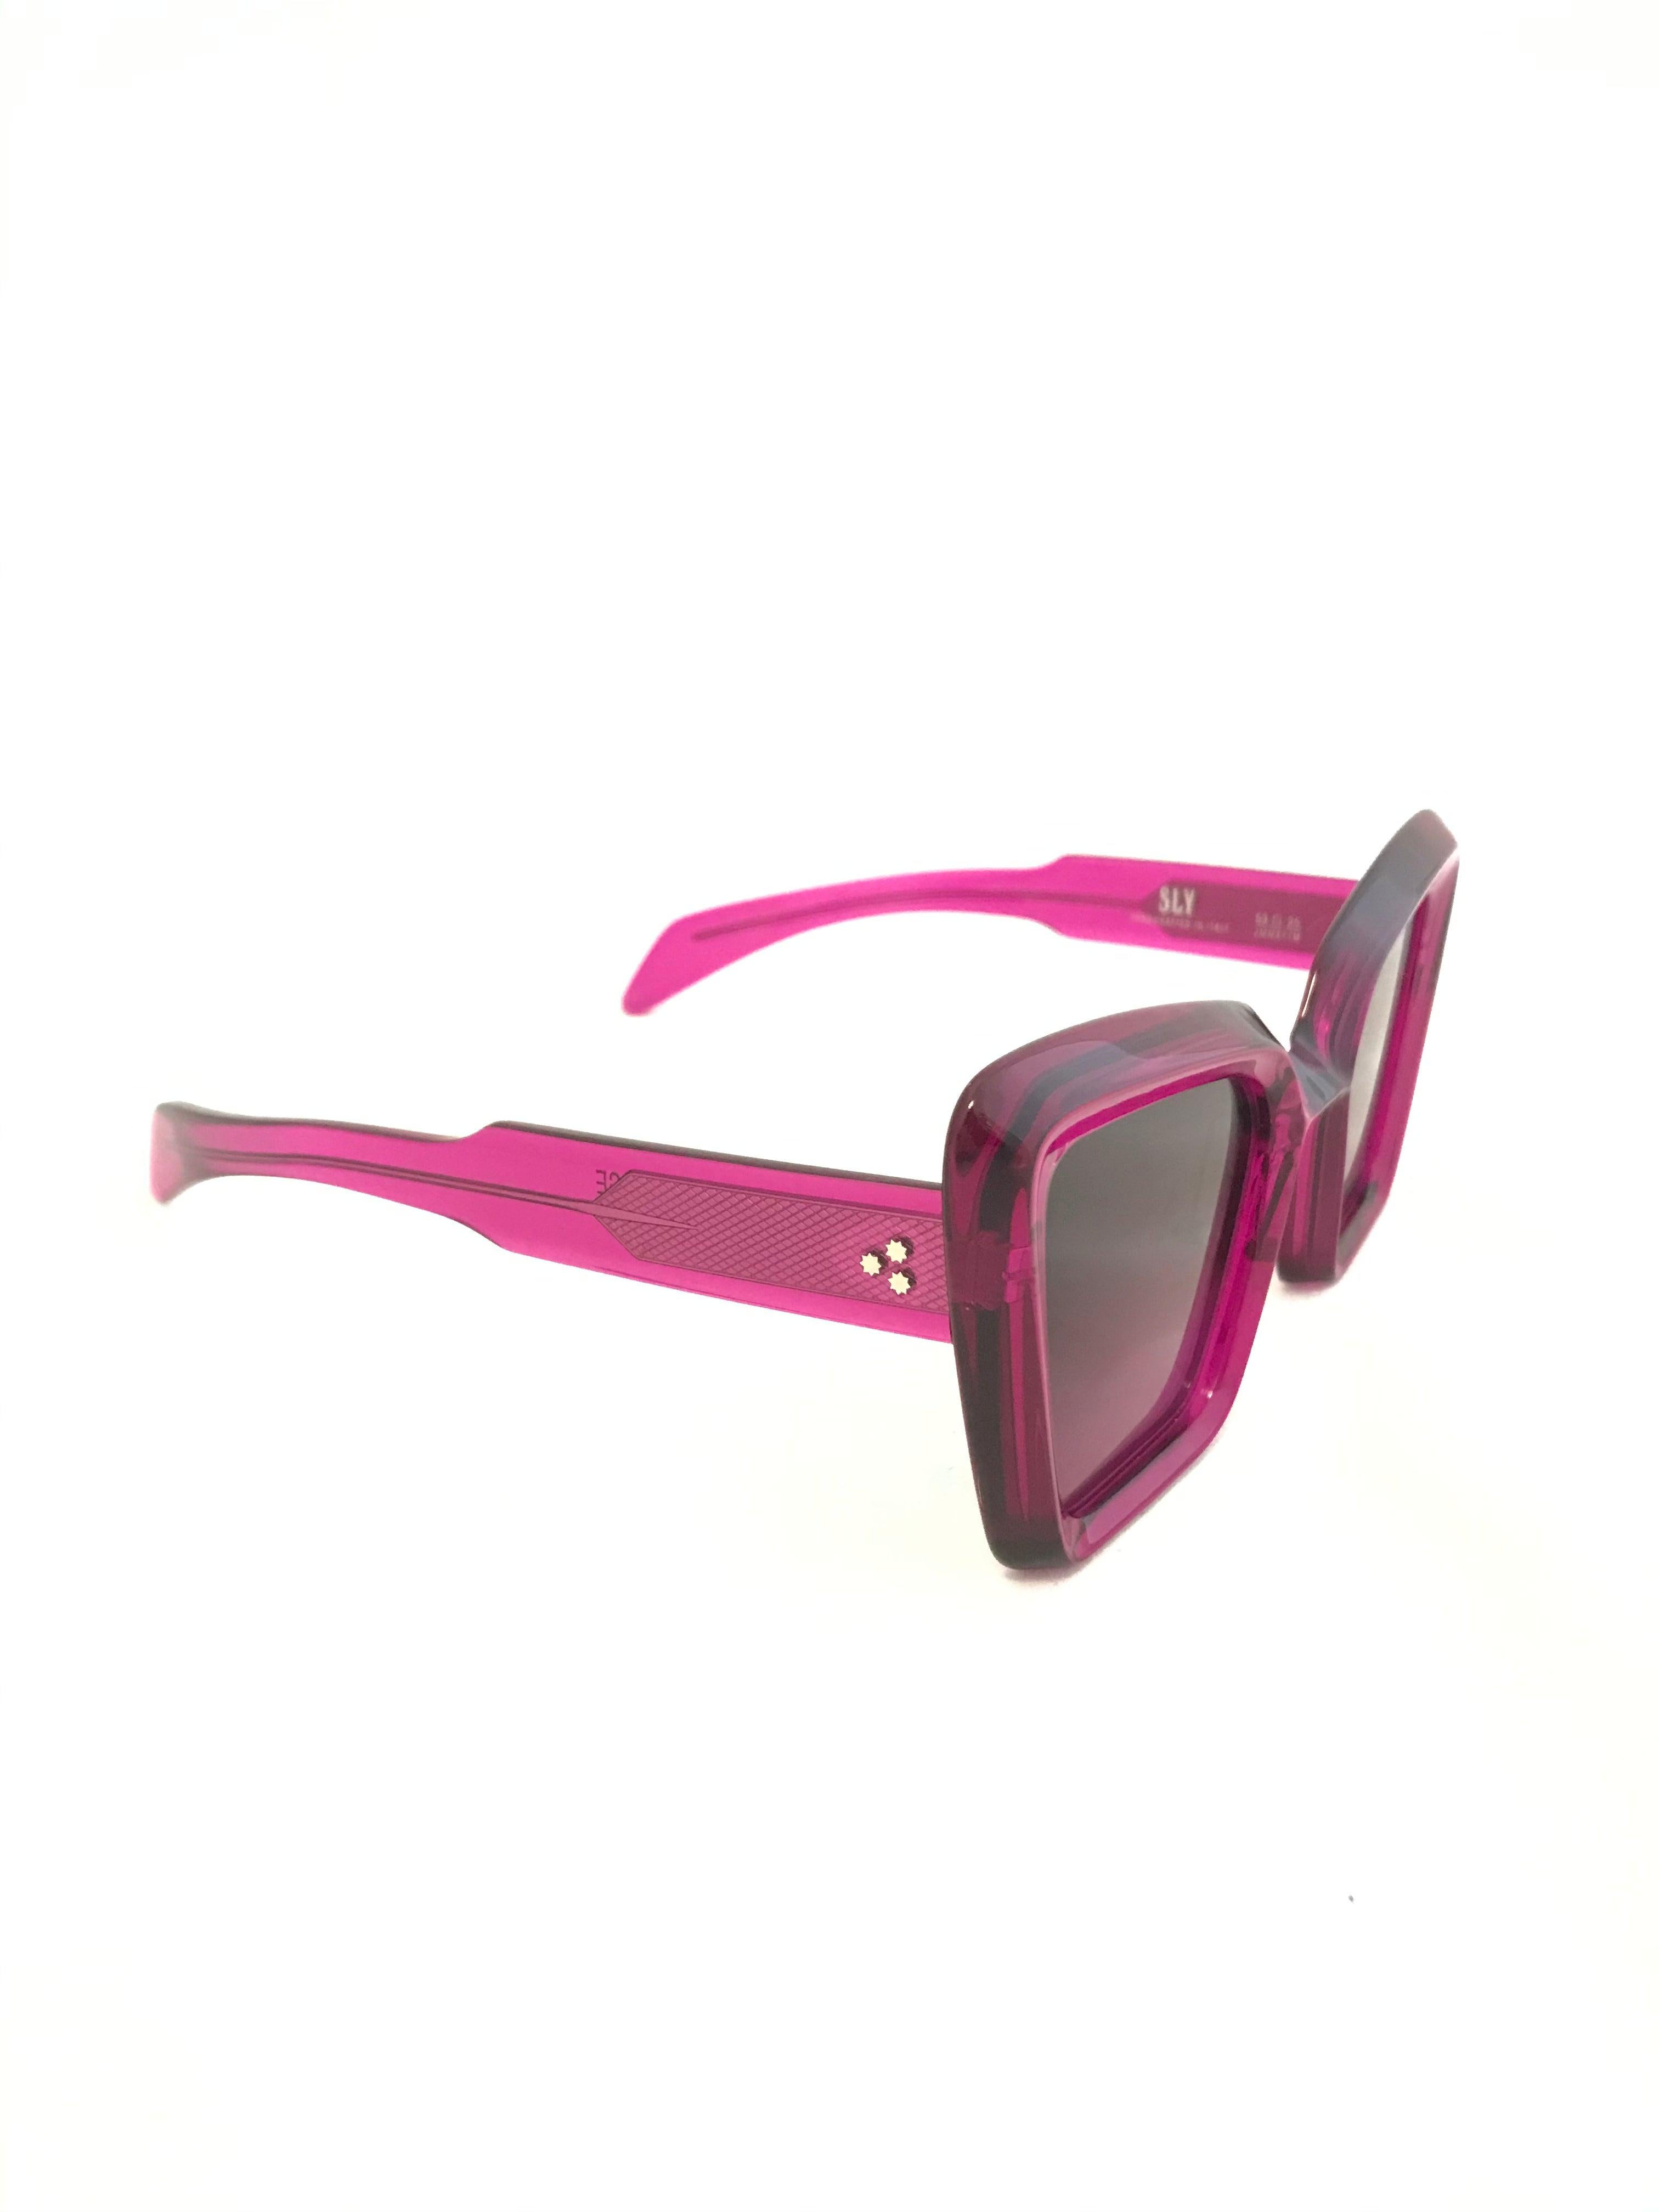 Jacques Marie Mage Limited Edition Hot Pink  'Sly' Sunglasses In Excellent Condition For Sale In Glasgow, GB